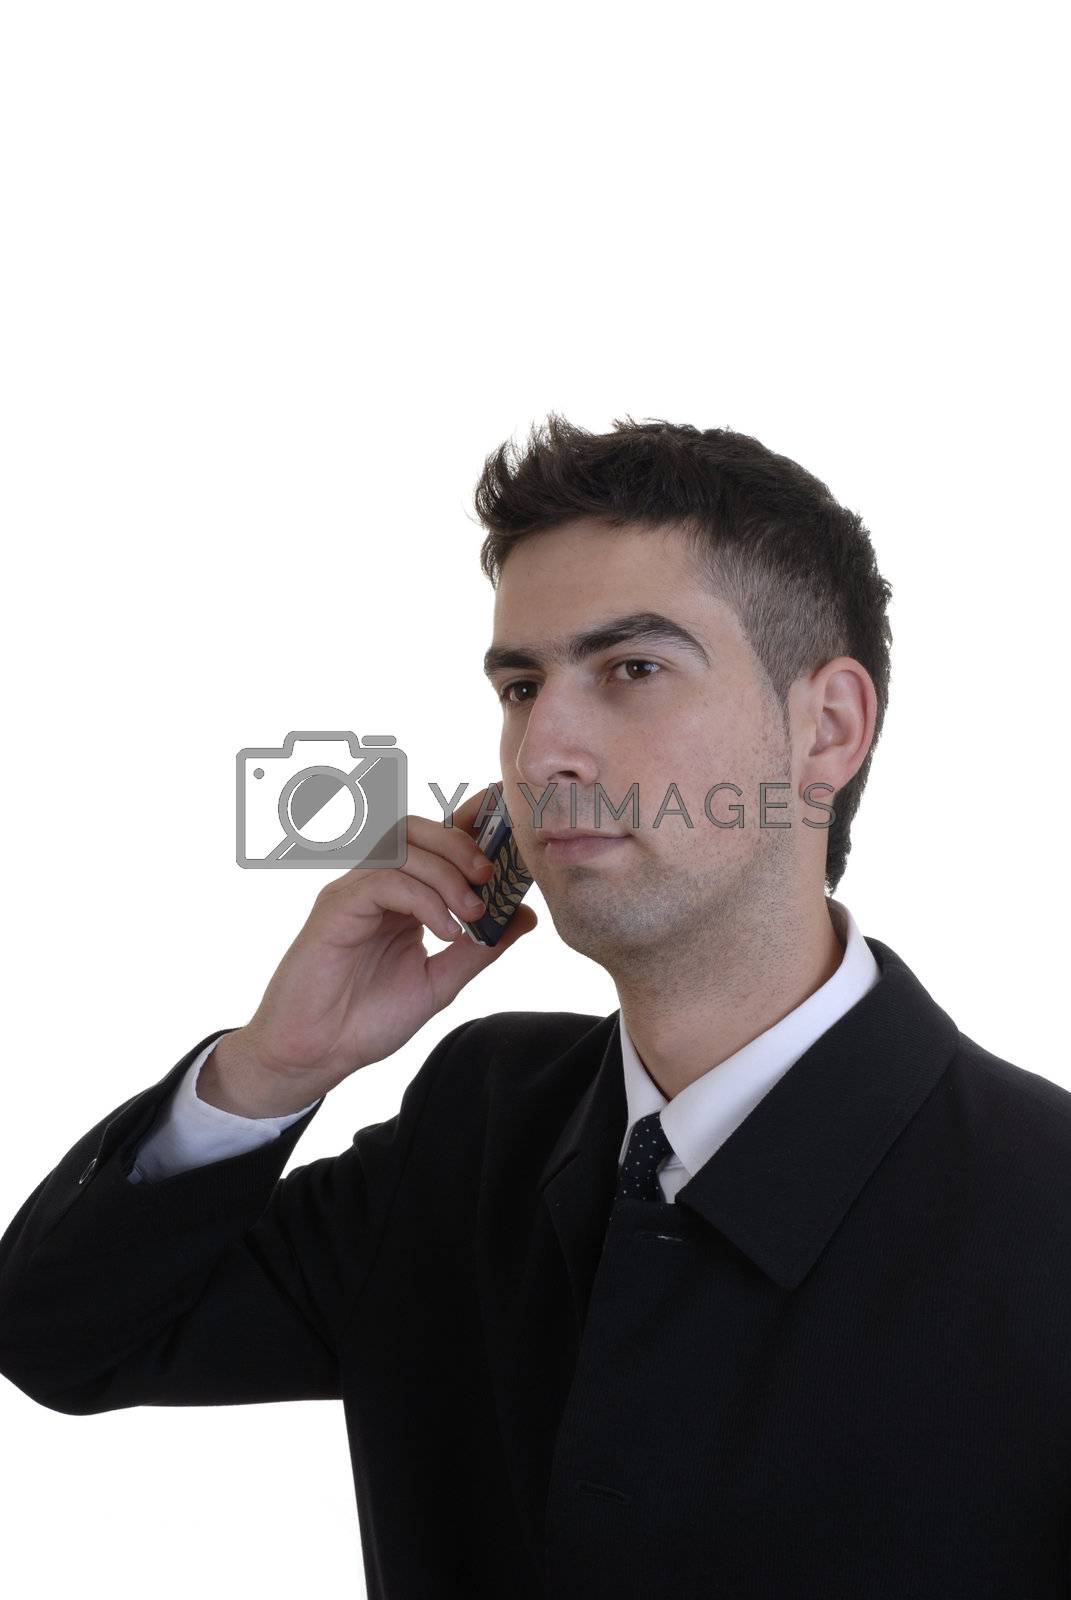 Royalty free image of calling by zittto